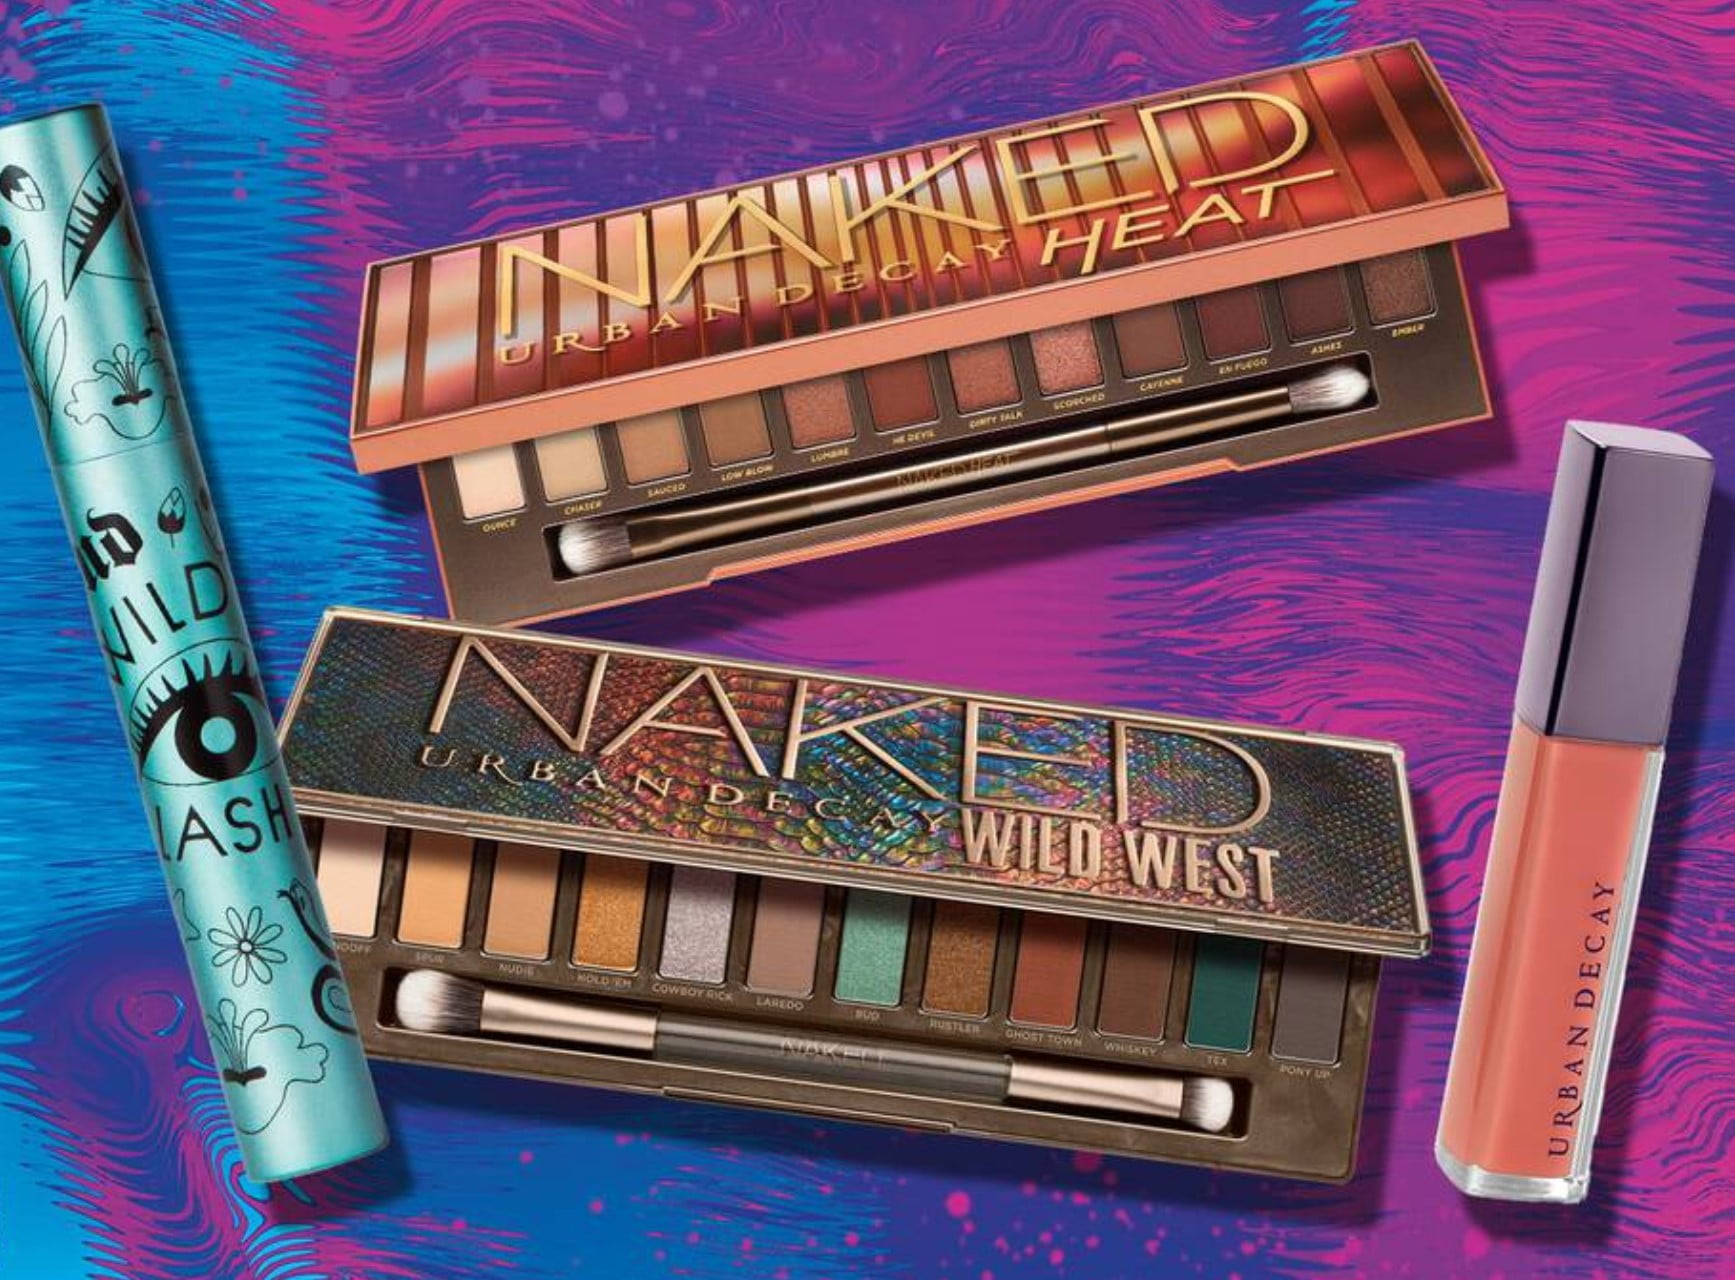 Up to 50% off sale at Urban Decay